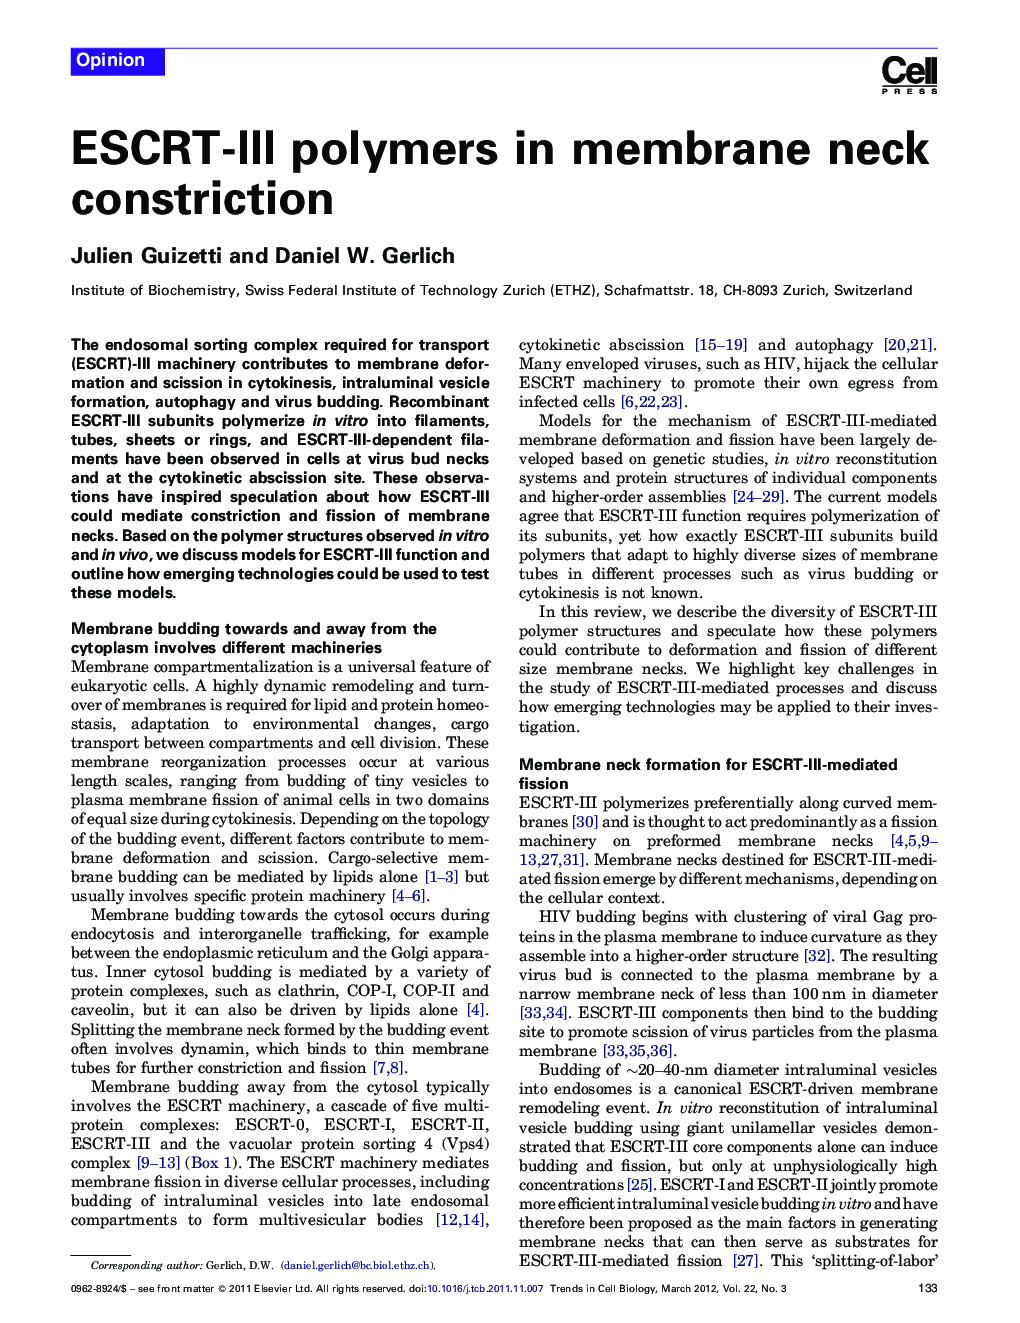 ESCRT-III polymers in membrane neck constriction